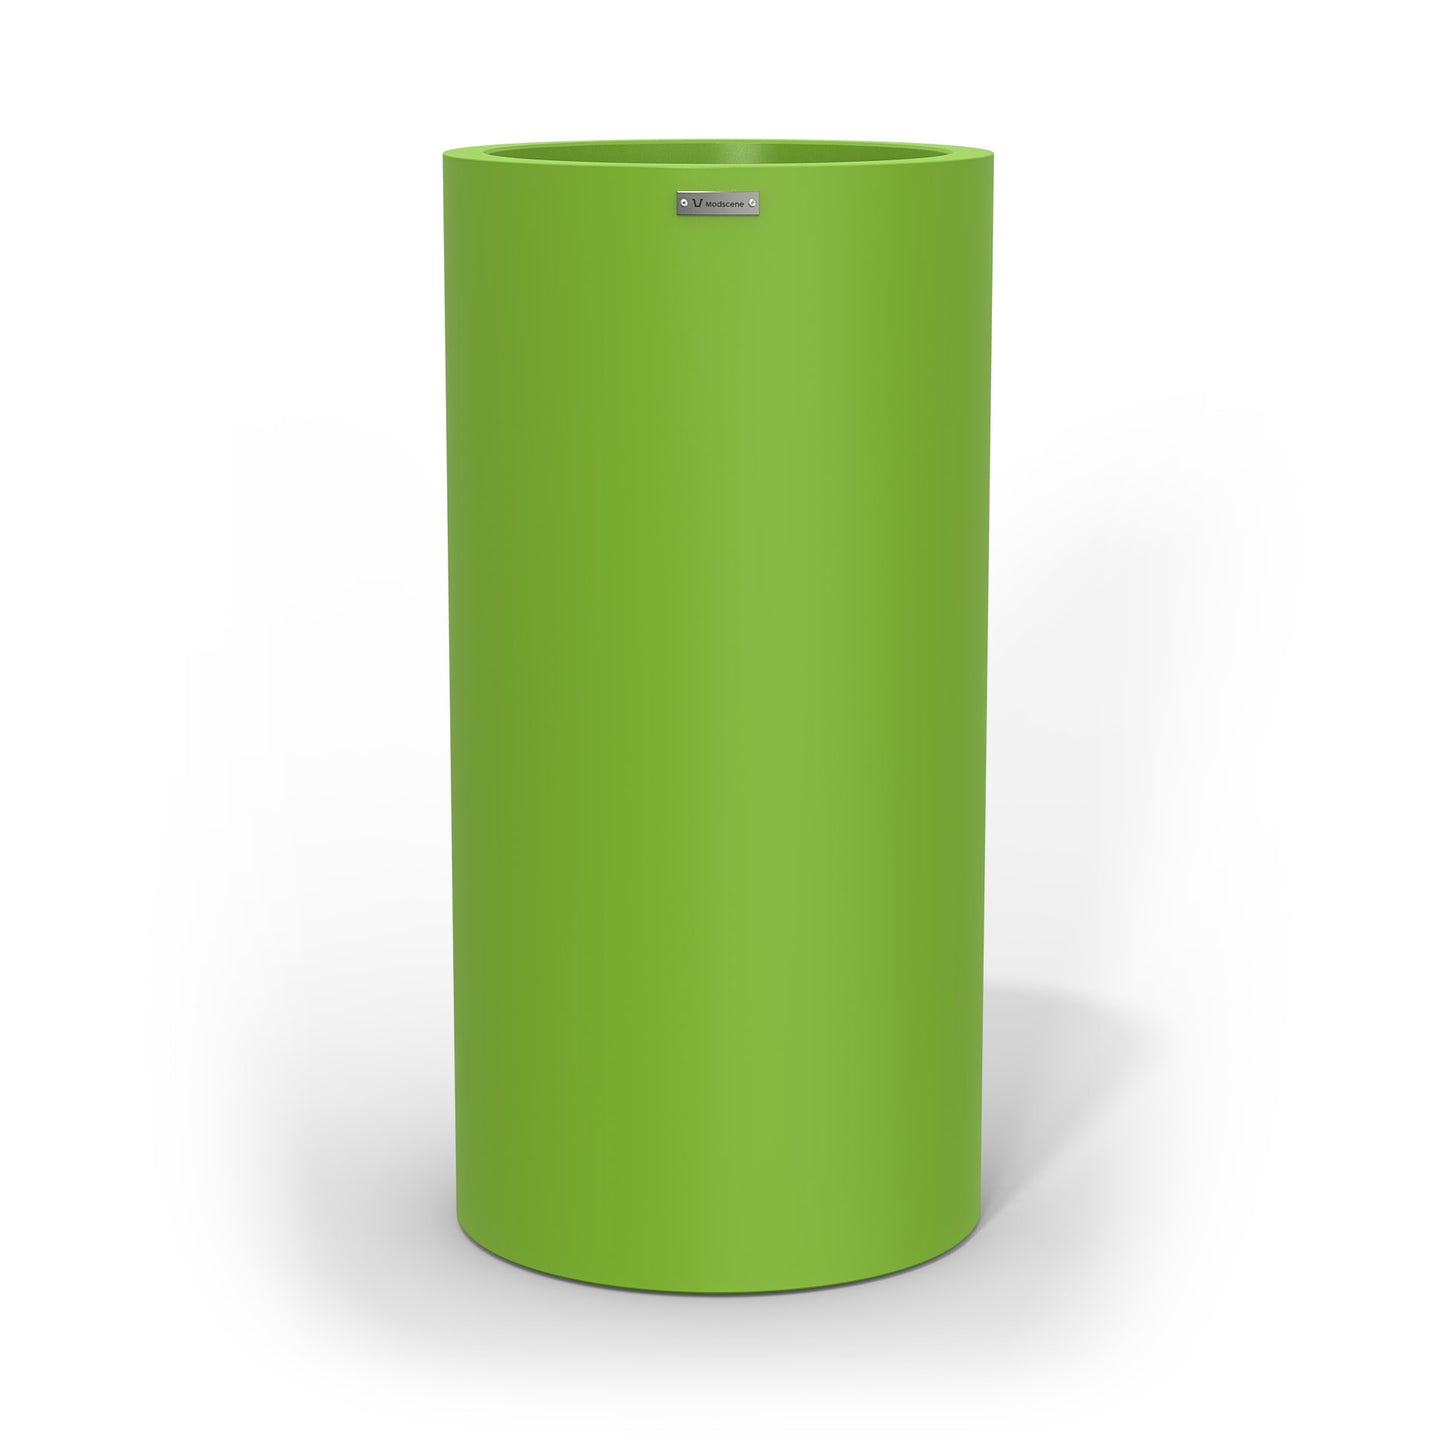 A tall cylinder planter pot in green made by Modscene NZ.